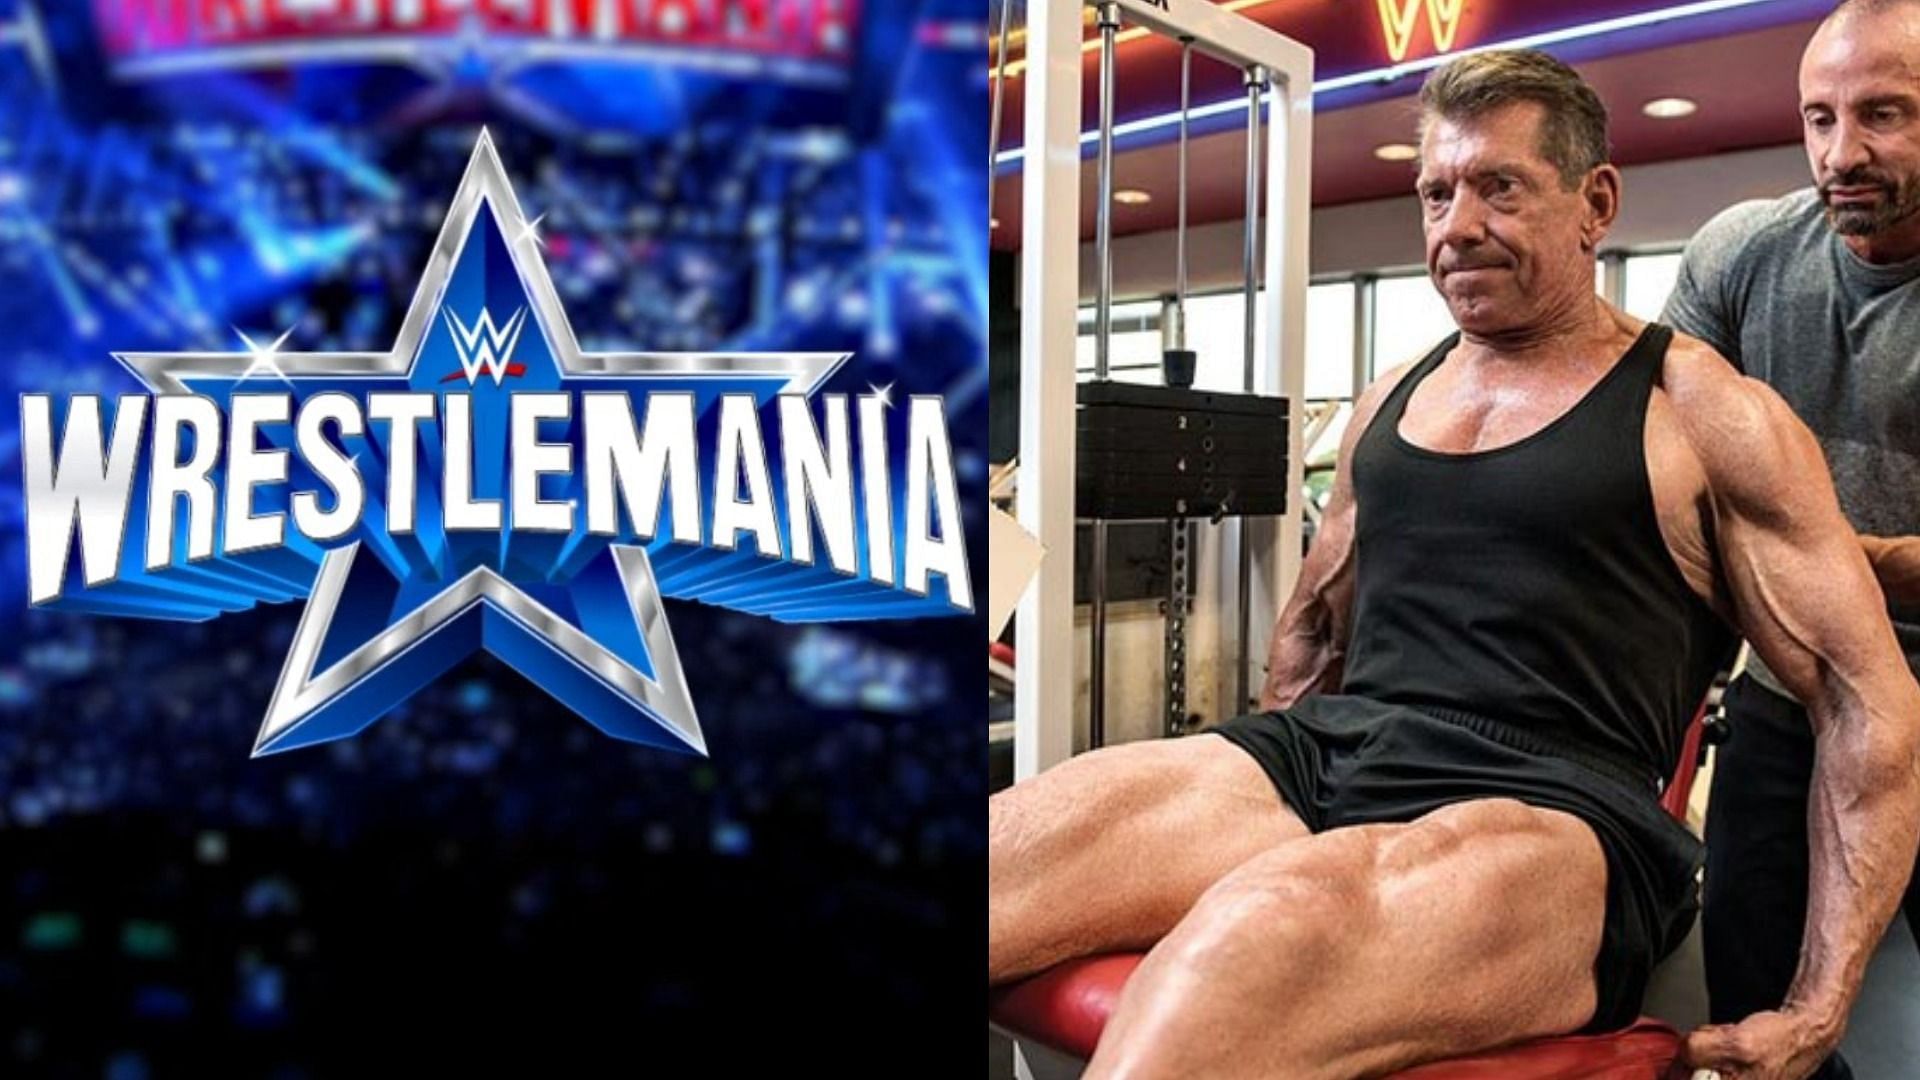 Vince McMahon is one of the fittest 76-year-old men in the world